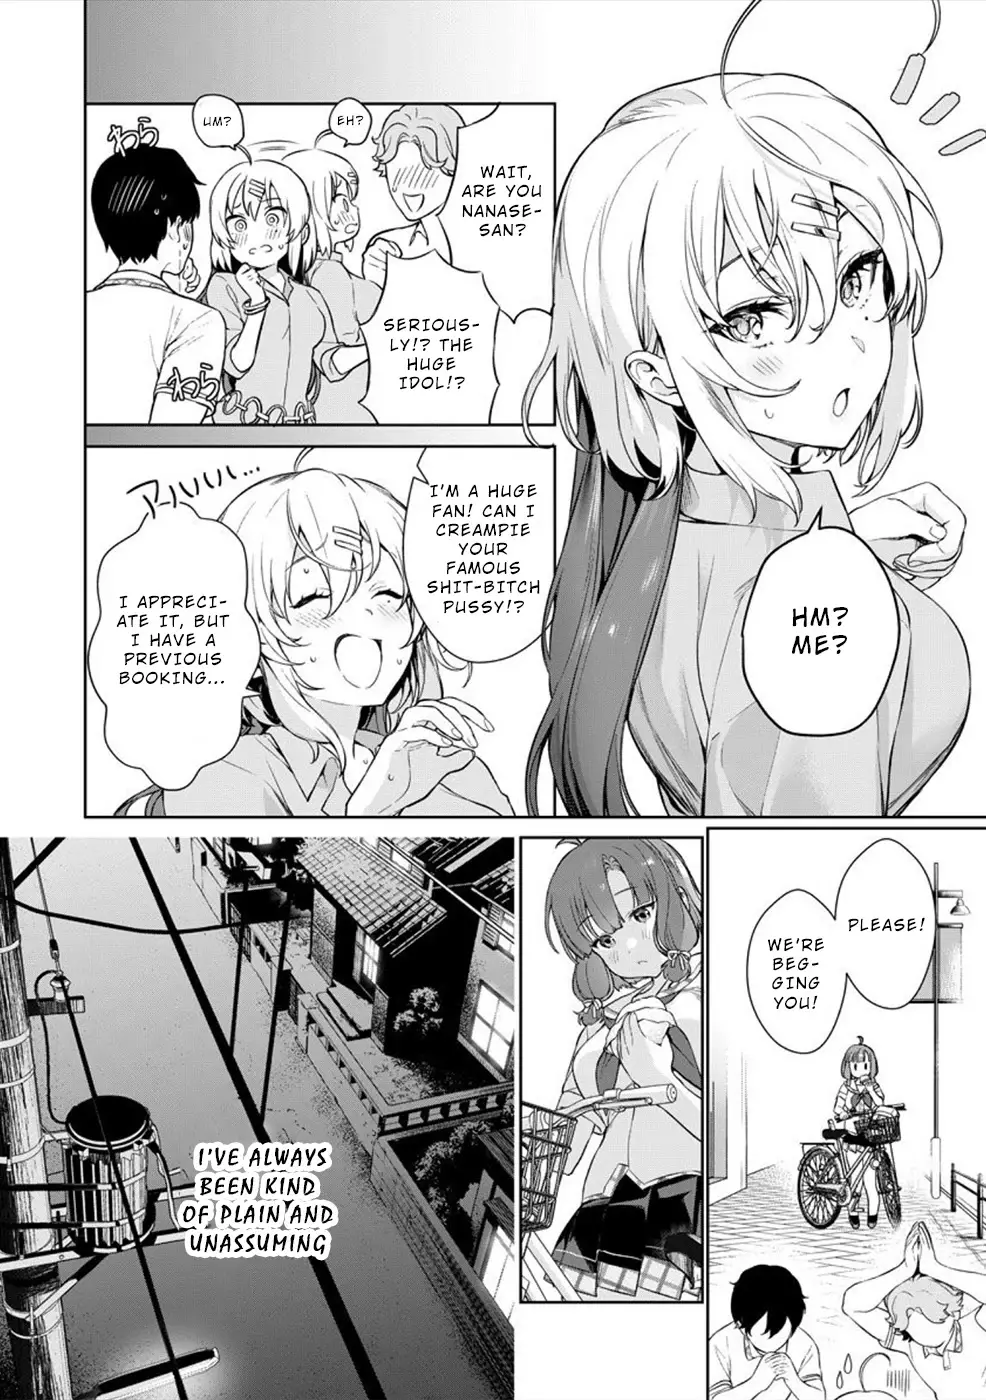 Nukita L - I Live On An Island Straight From A Fap Game, What On Earth Should I Do? - 1 page 16